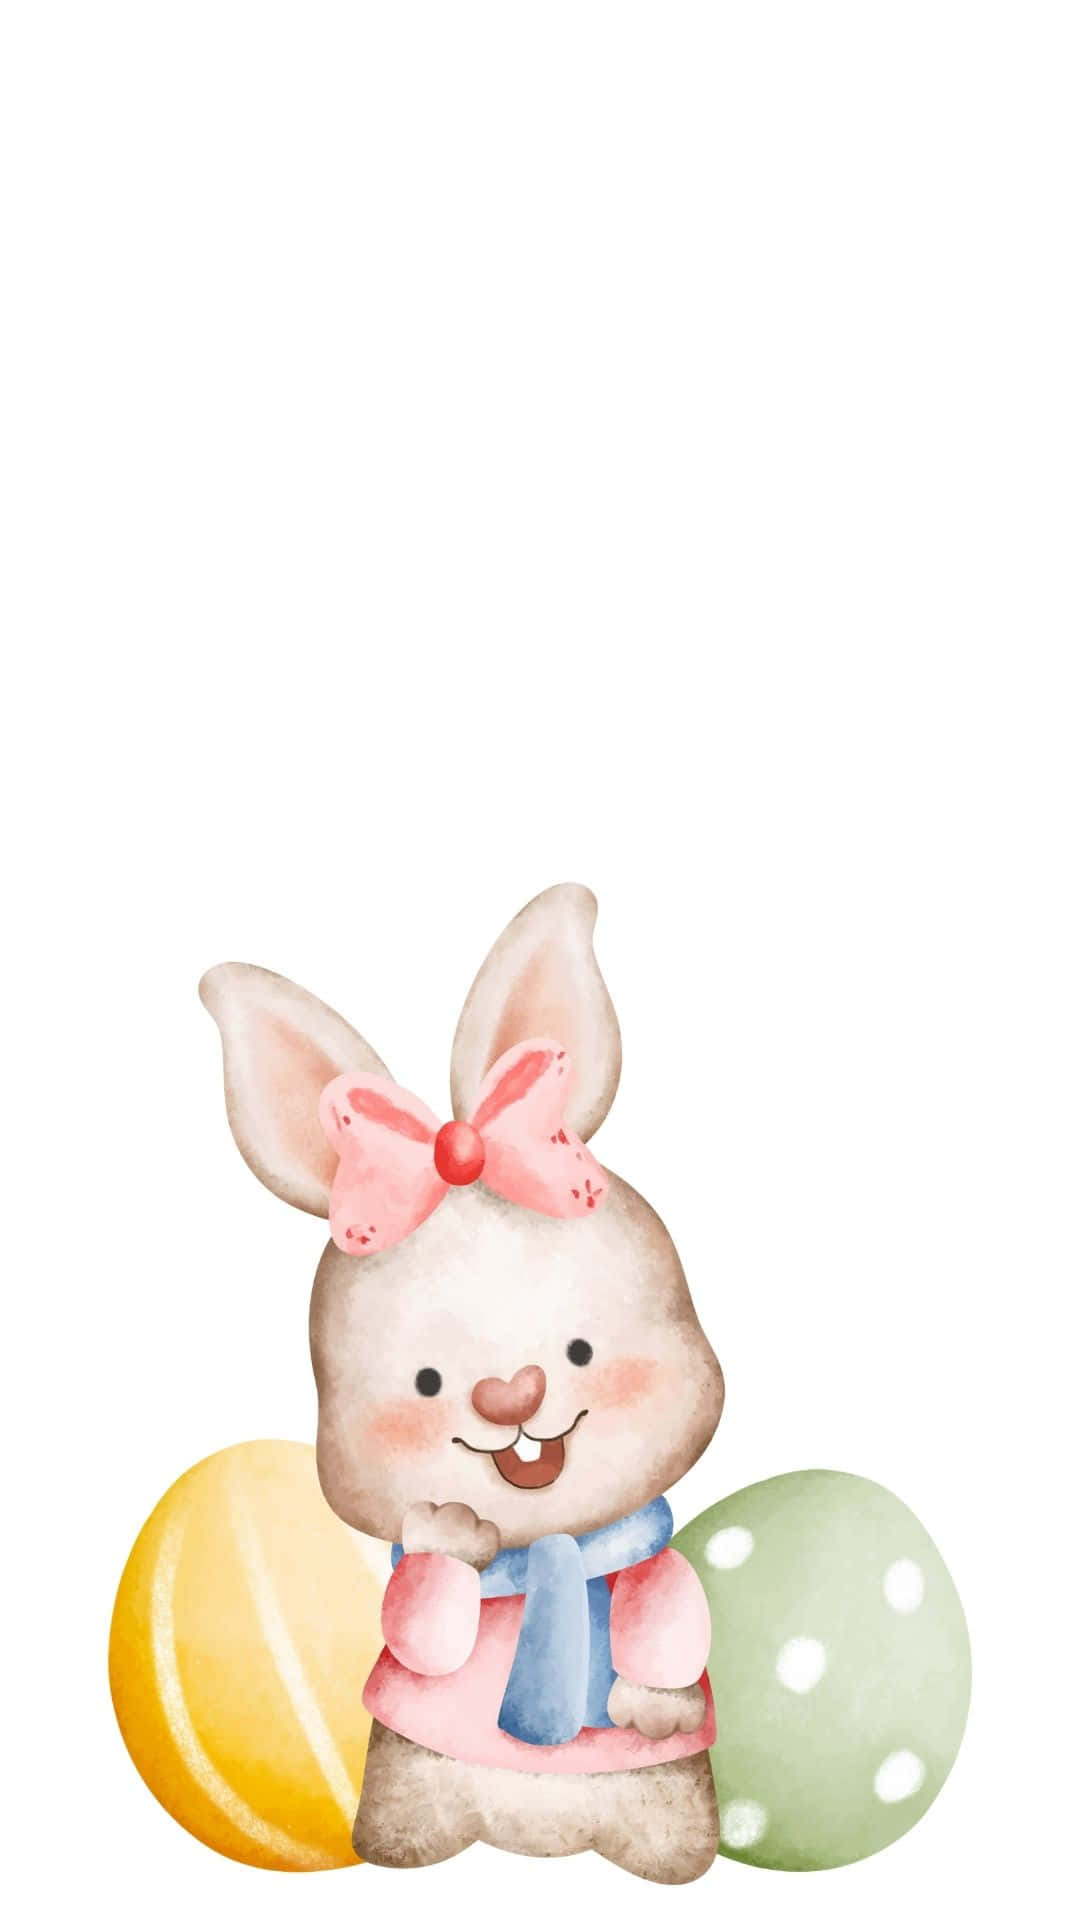 The Easter Bunny Is Ready To Deliver Easter Cheer!